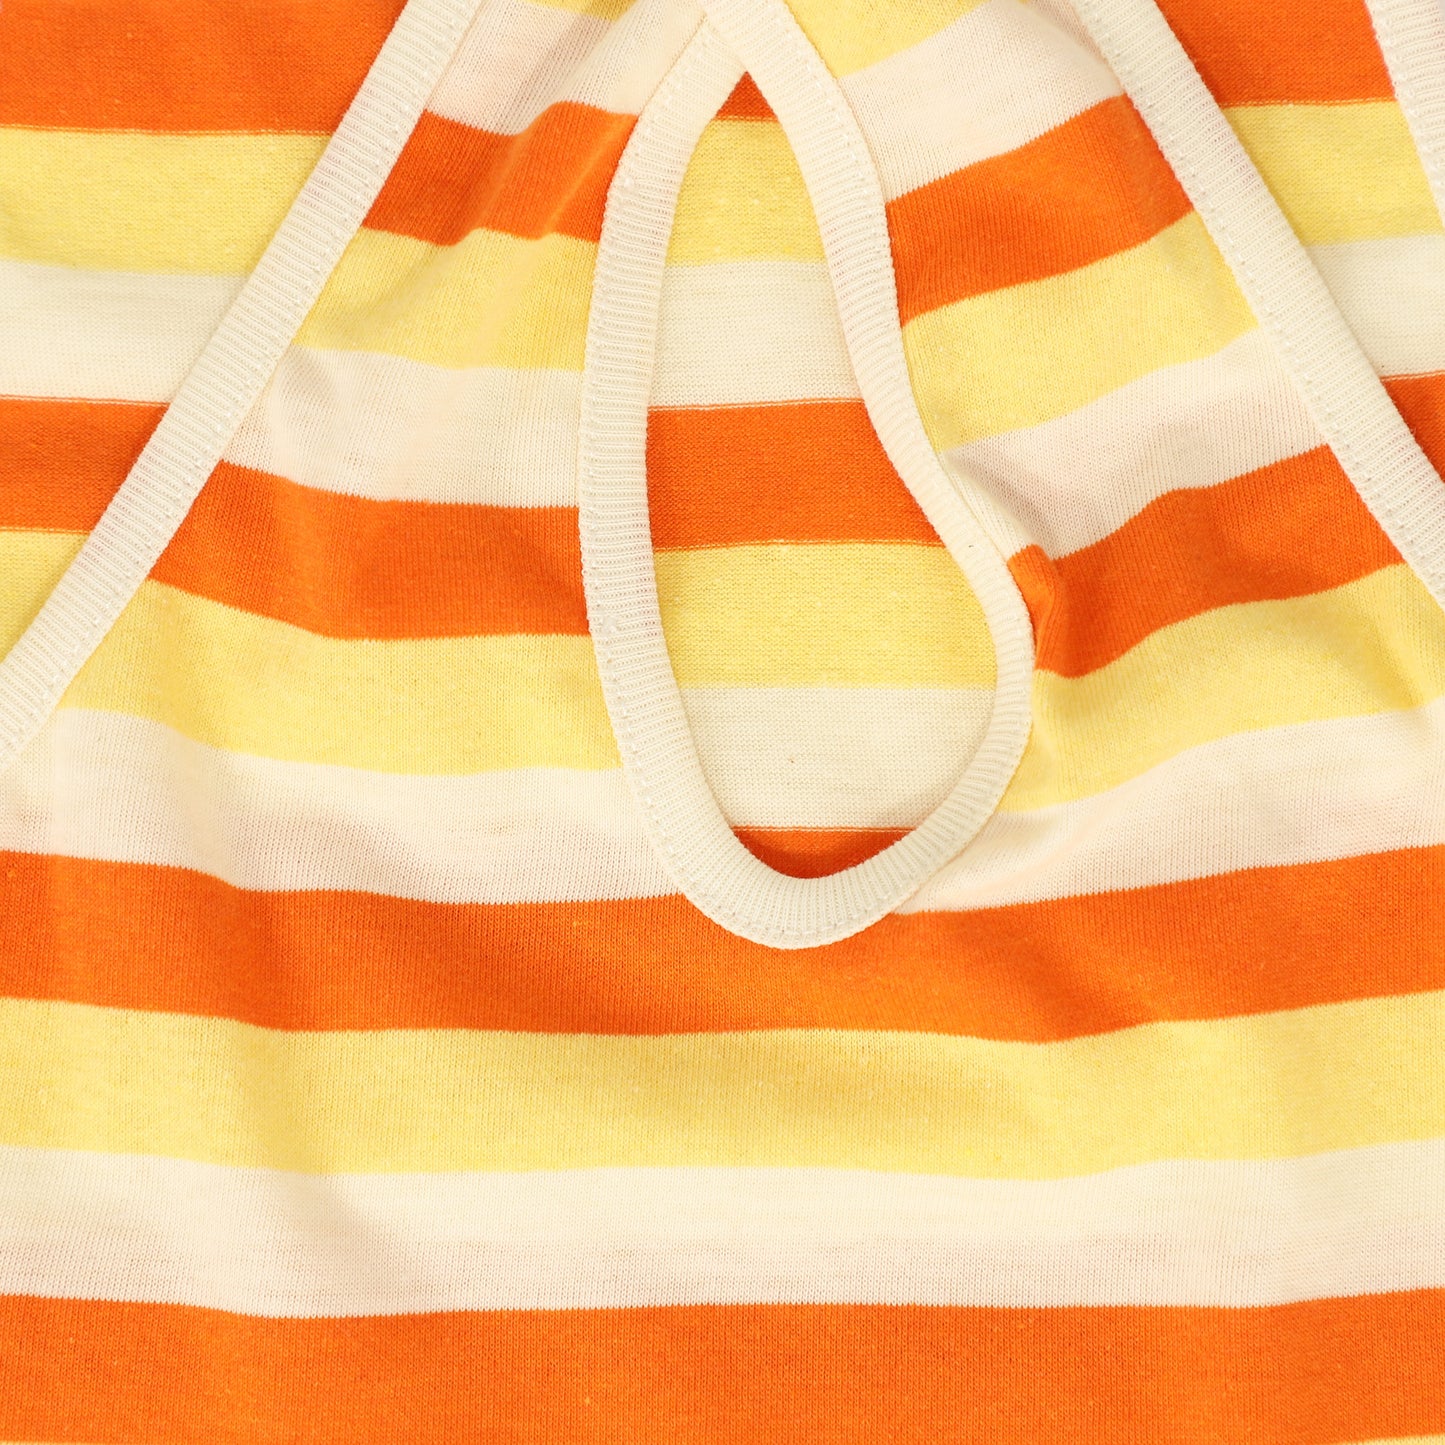 BE FOR ALL YELLOW/ORANGE CRISS CROSS JUMPER [FINAL SALE]